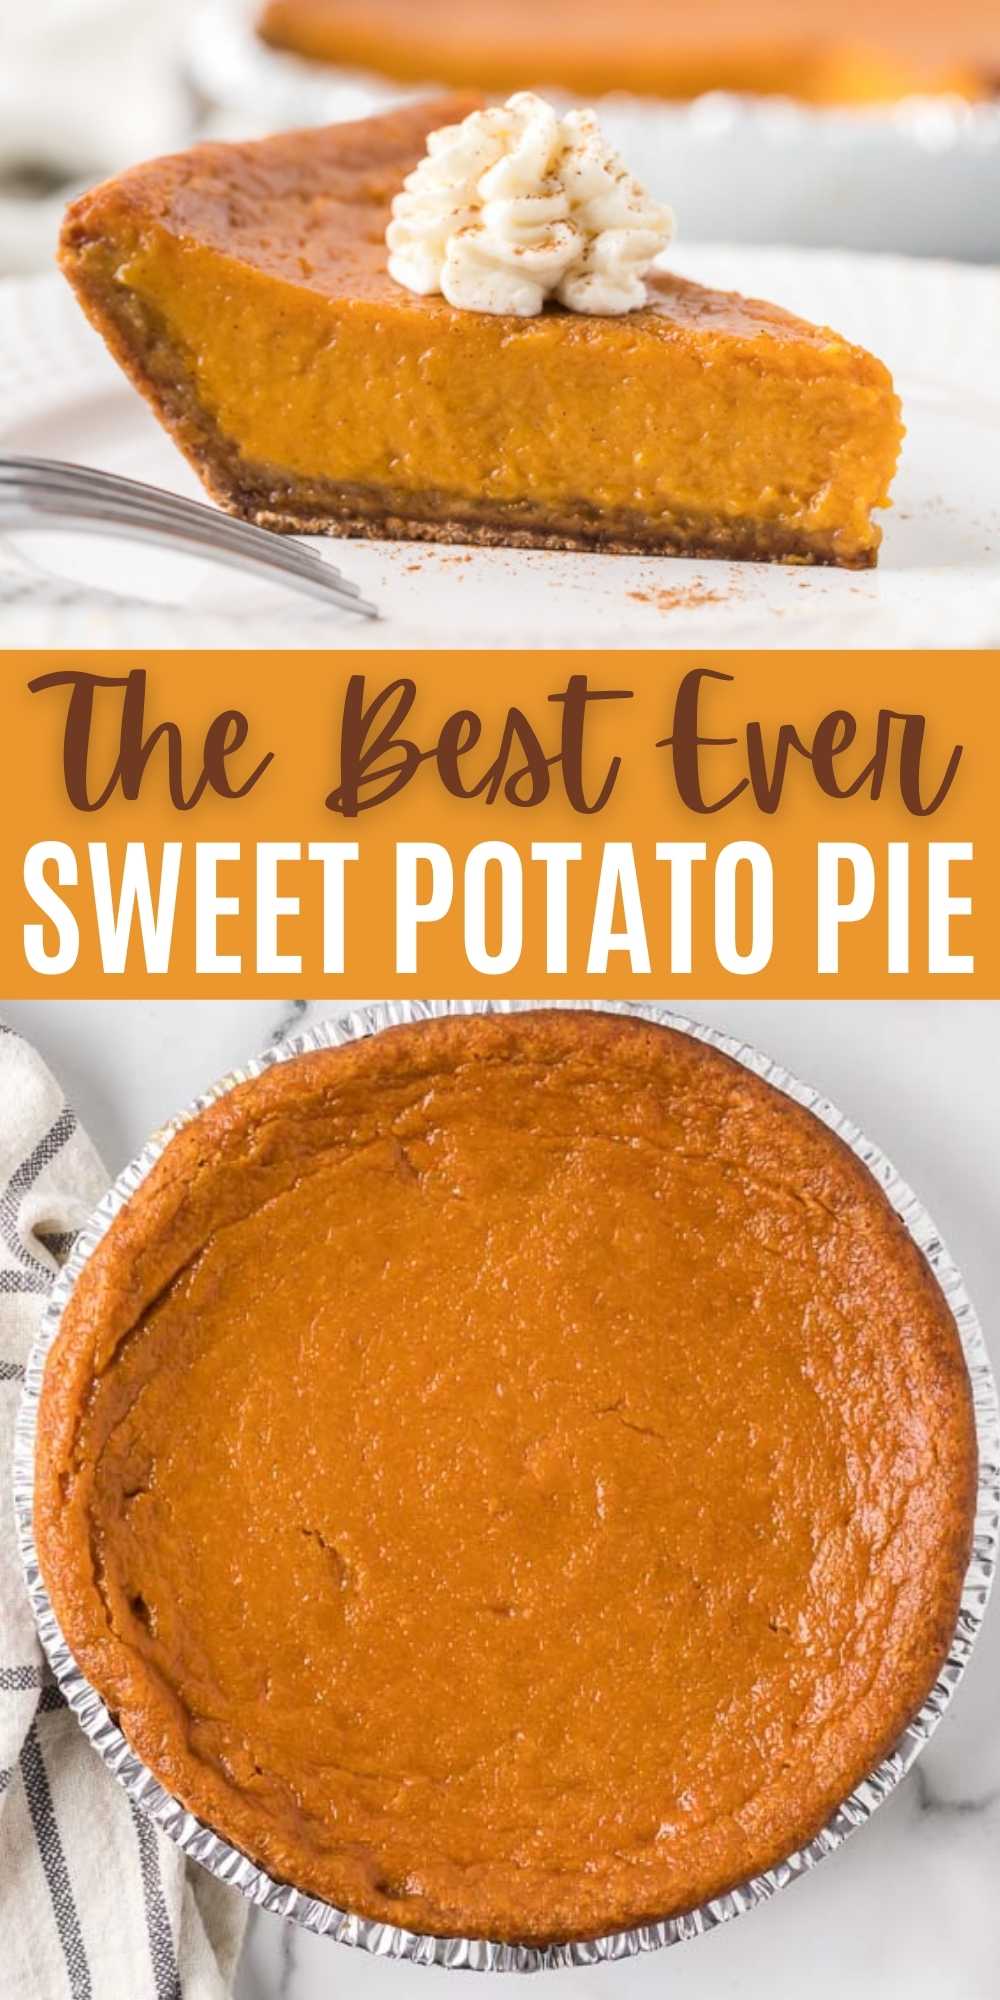 Learn how to make a classic southern sweet potato pie! You won’t believe how easy this pie recipe is to make! Simple and easy, old-fashioned Thanksgiving sweet potato pie from scratch!  This is one of my favorite Thanksgiving dessert recipes.  #eatingonadime #pierecipes #thanksgivingdesserts #sweetpotatorecipes #holidaydesserts 
